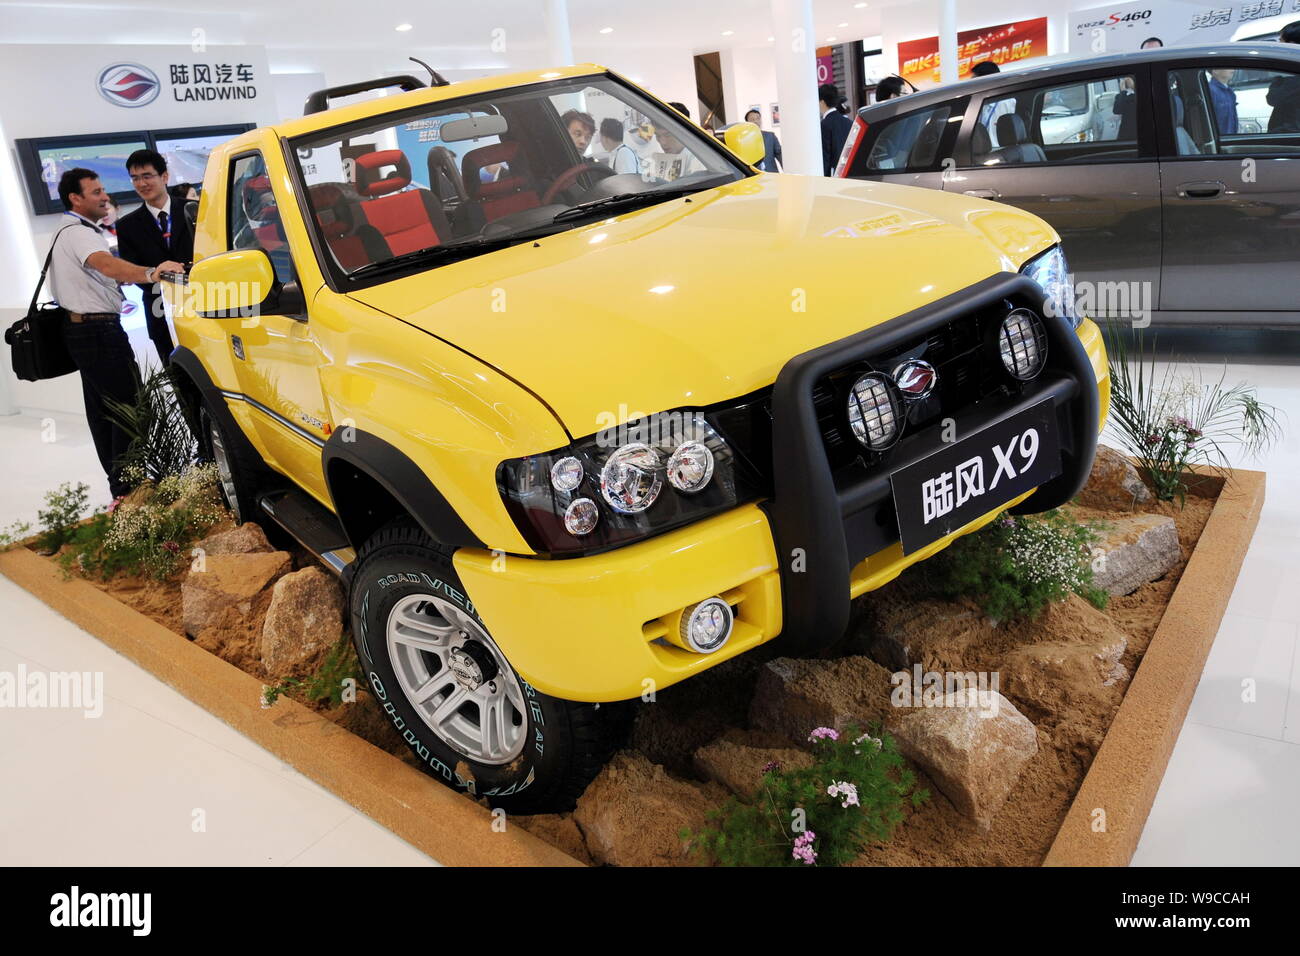 A JMC (Jiangling Motors Co., Ltd.) Landwind X9 is seen on display at the 13th Shanghai International Automobile Industry Exhibition, known as Auto Sha Stock Photo